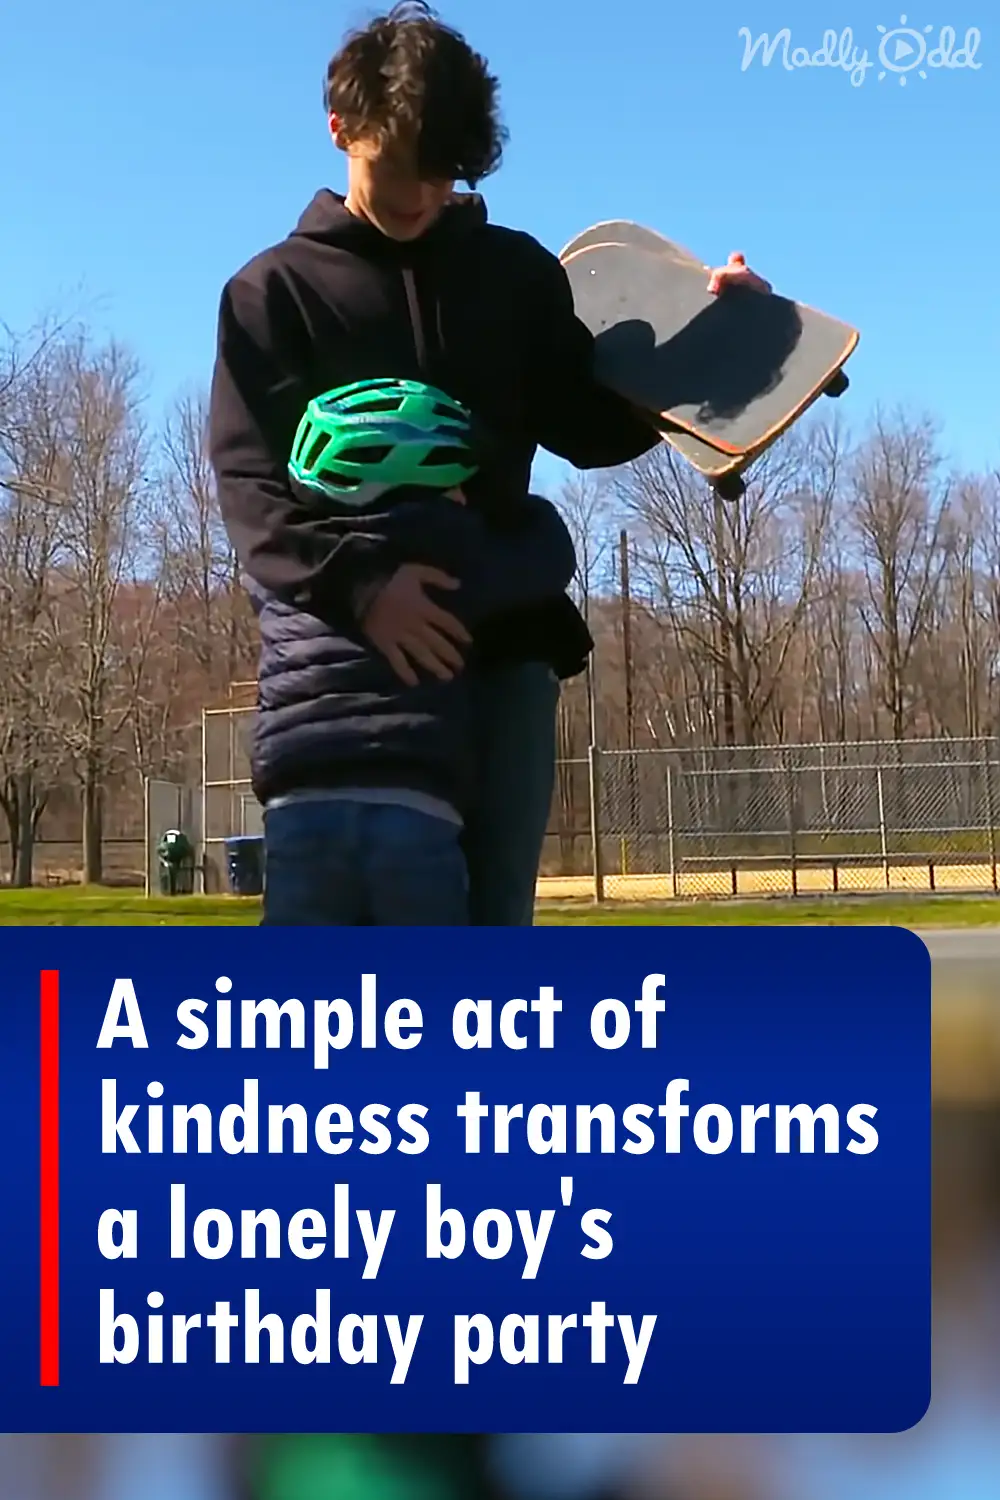 A simple act of kindness transforms a lonely boy's birthday party